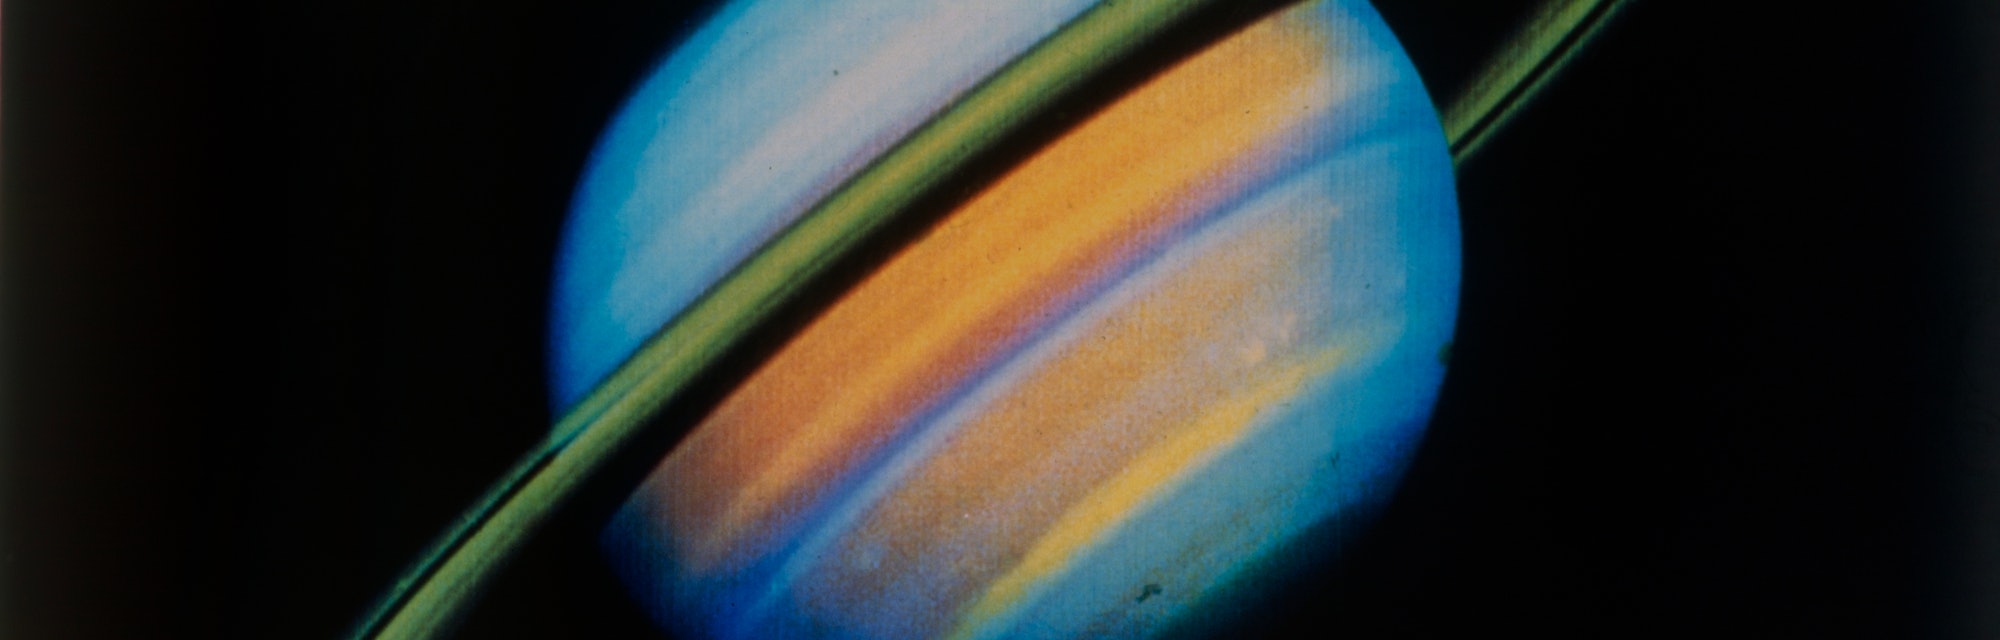 Saturn from 27 million miles, seen from Voyager 2 spacecraft. Artist NASA. (Photo by Heritage Space/...